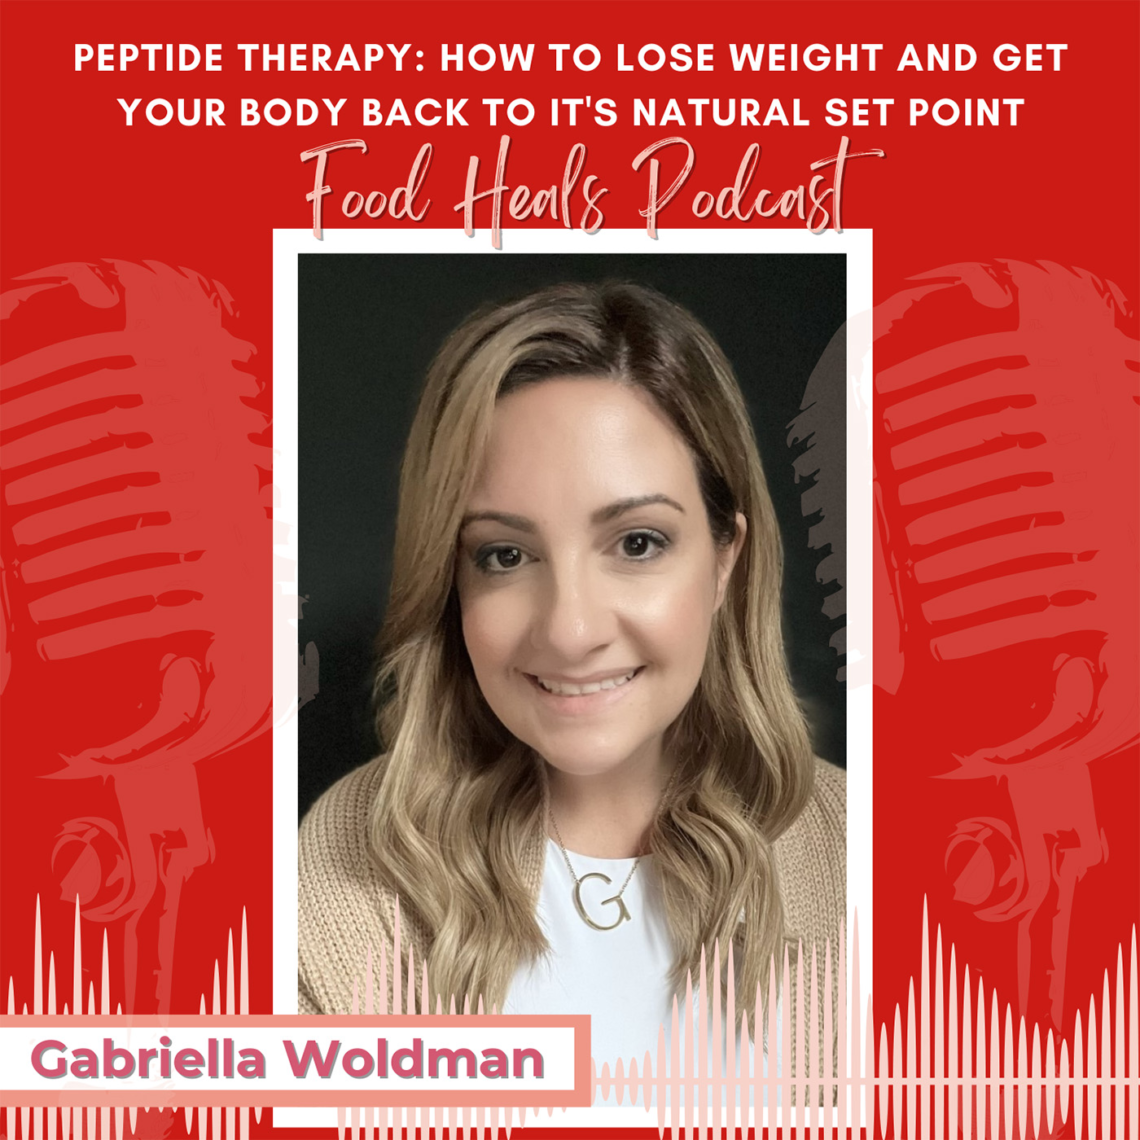 Gabriella Woldman is today's guest on The Food Heals Podcast to discuss semaglutide and how to lose weight naturally with peptides.